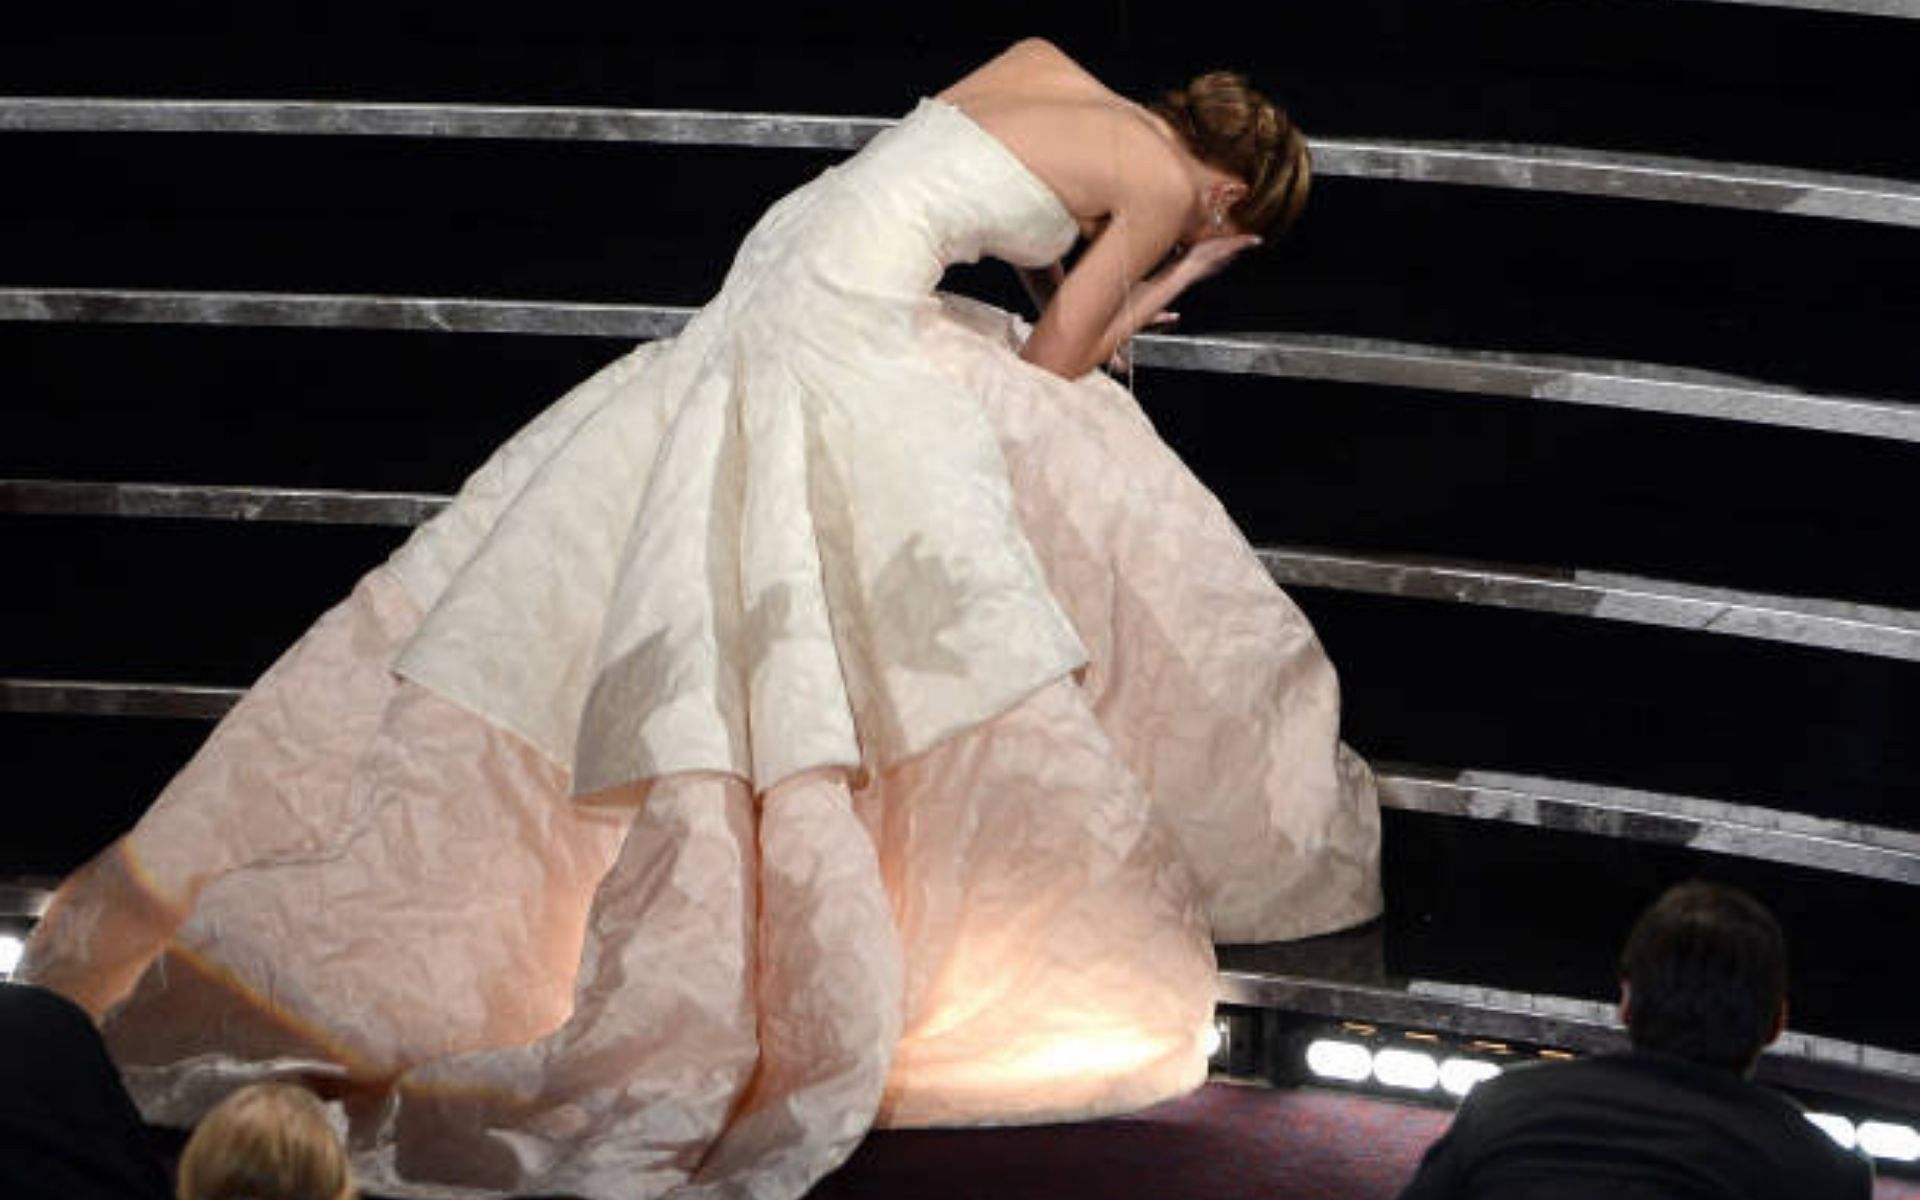 Jennifer Lawrence tripped while climbing the stairs to collect her first Oscar at the 85th Academy Awards (Image via Getty Images)